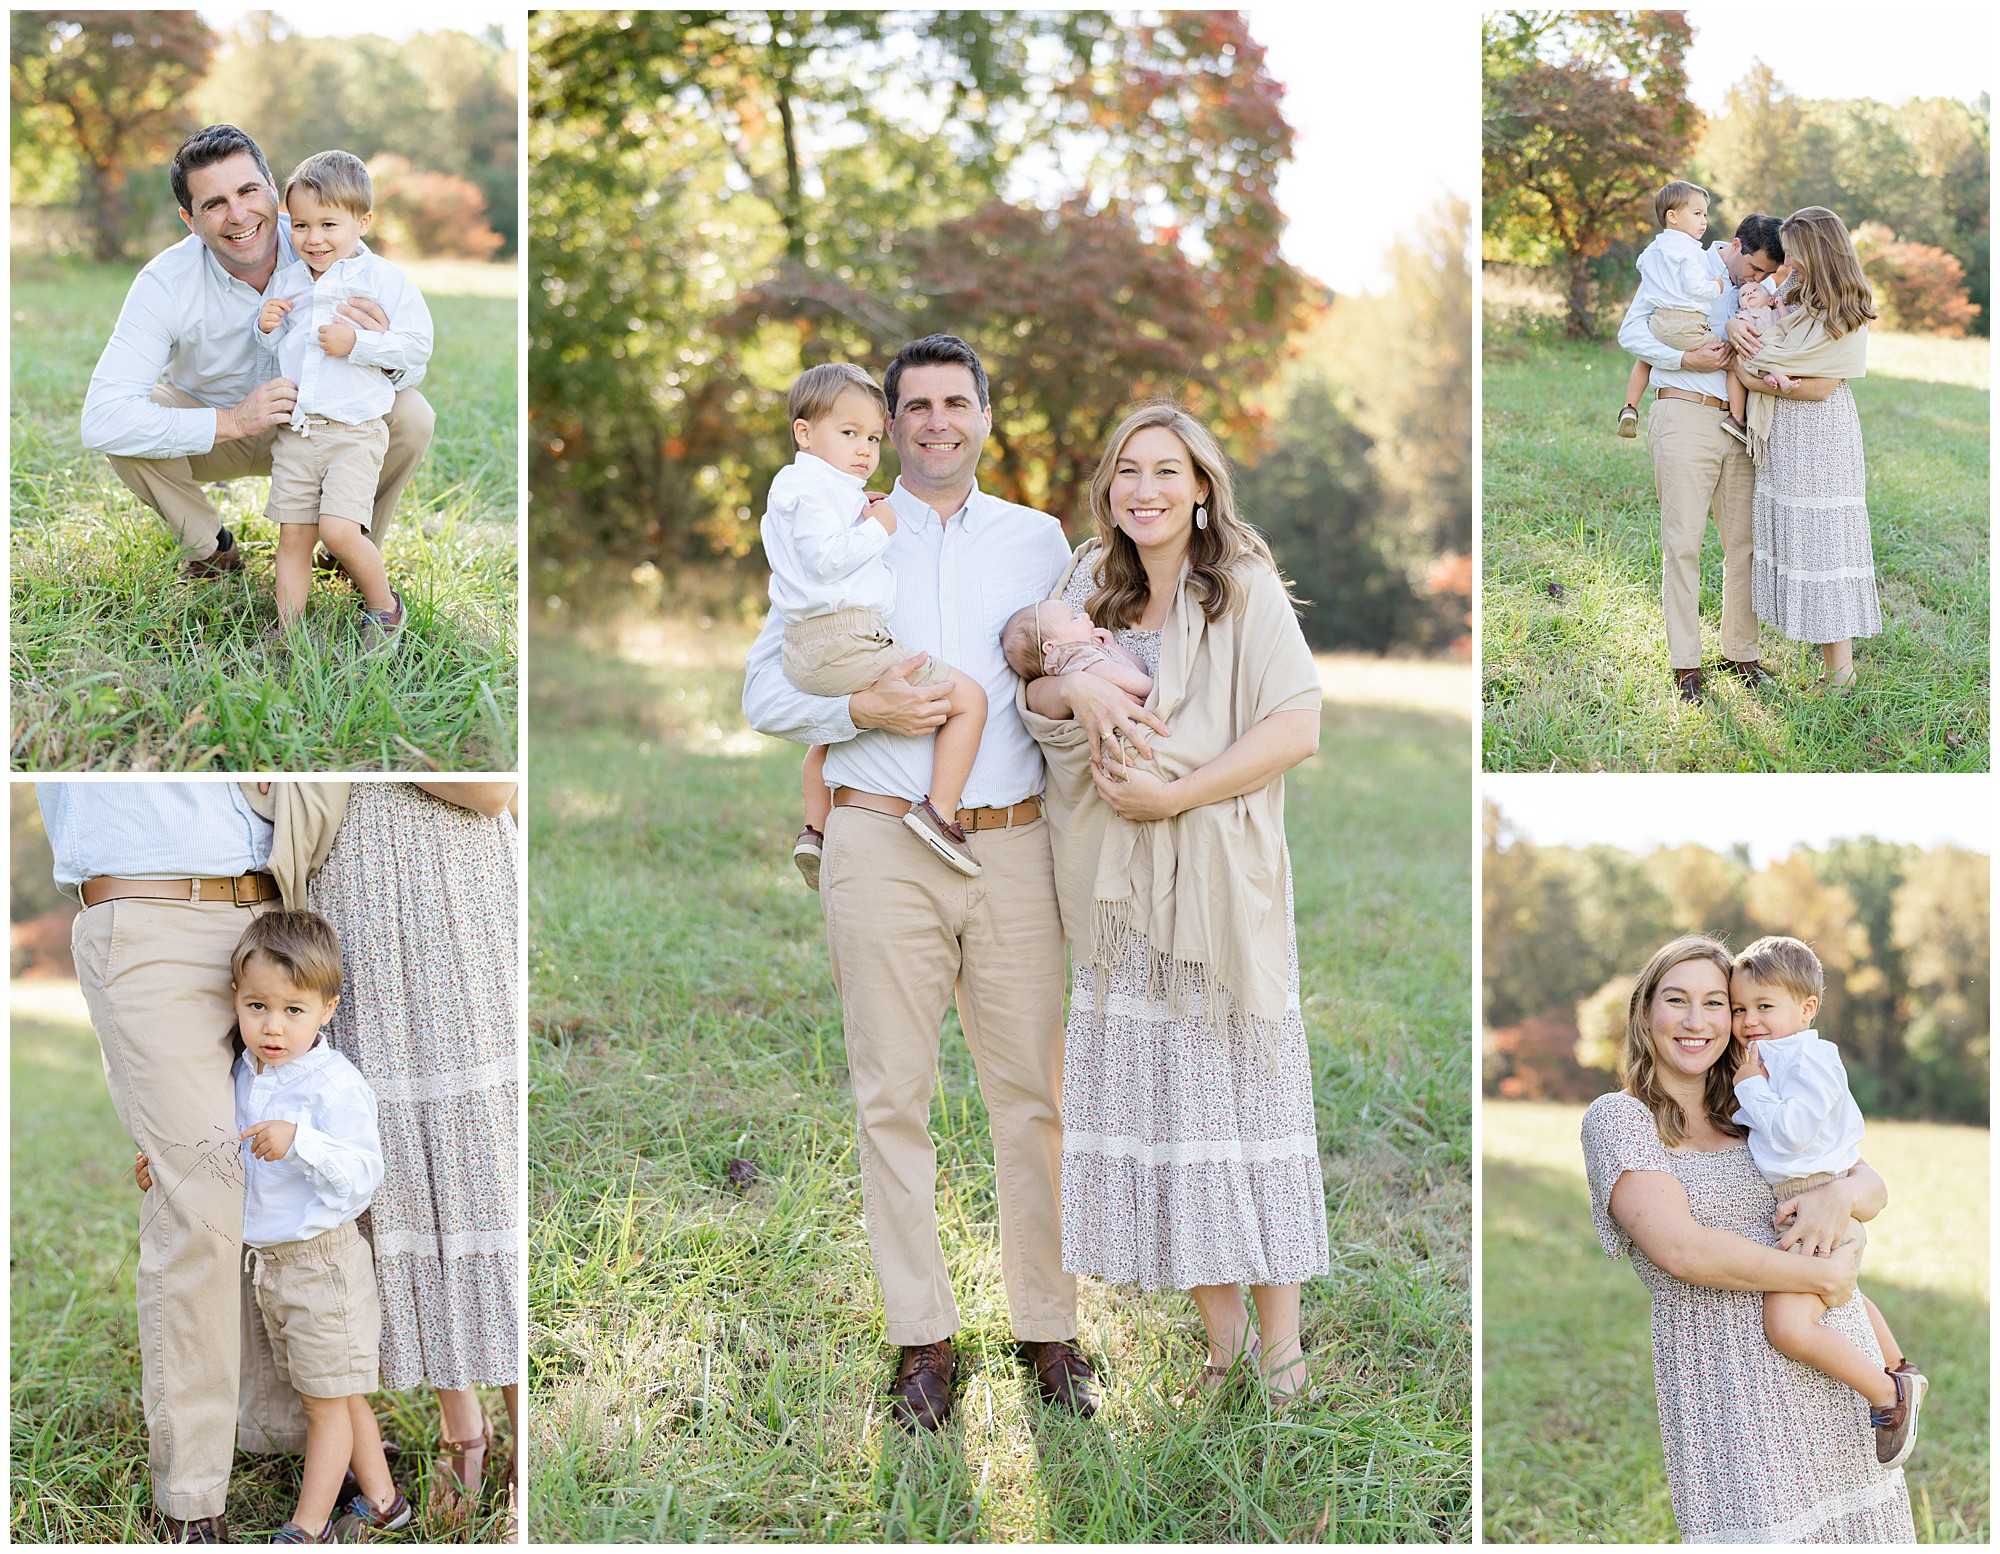 Collage of five photos of a family with a toddler boy and baby standing in a green field lined with fall leaves on trees.